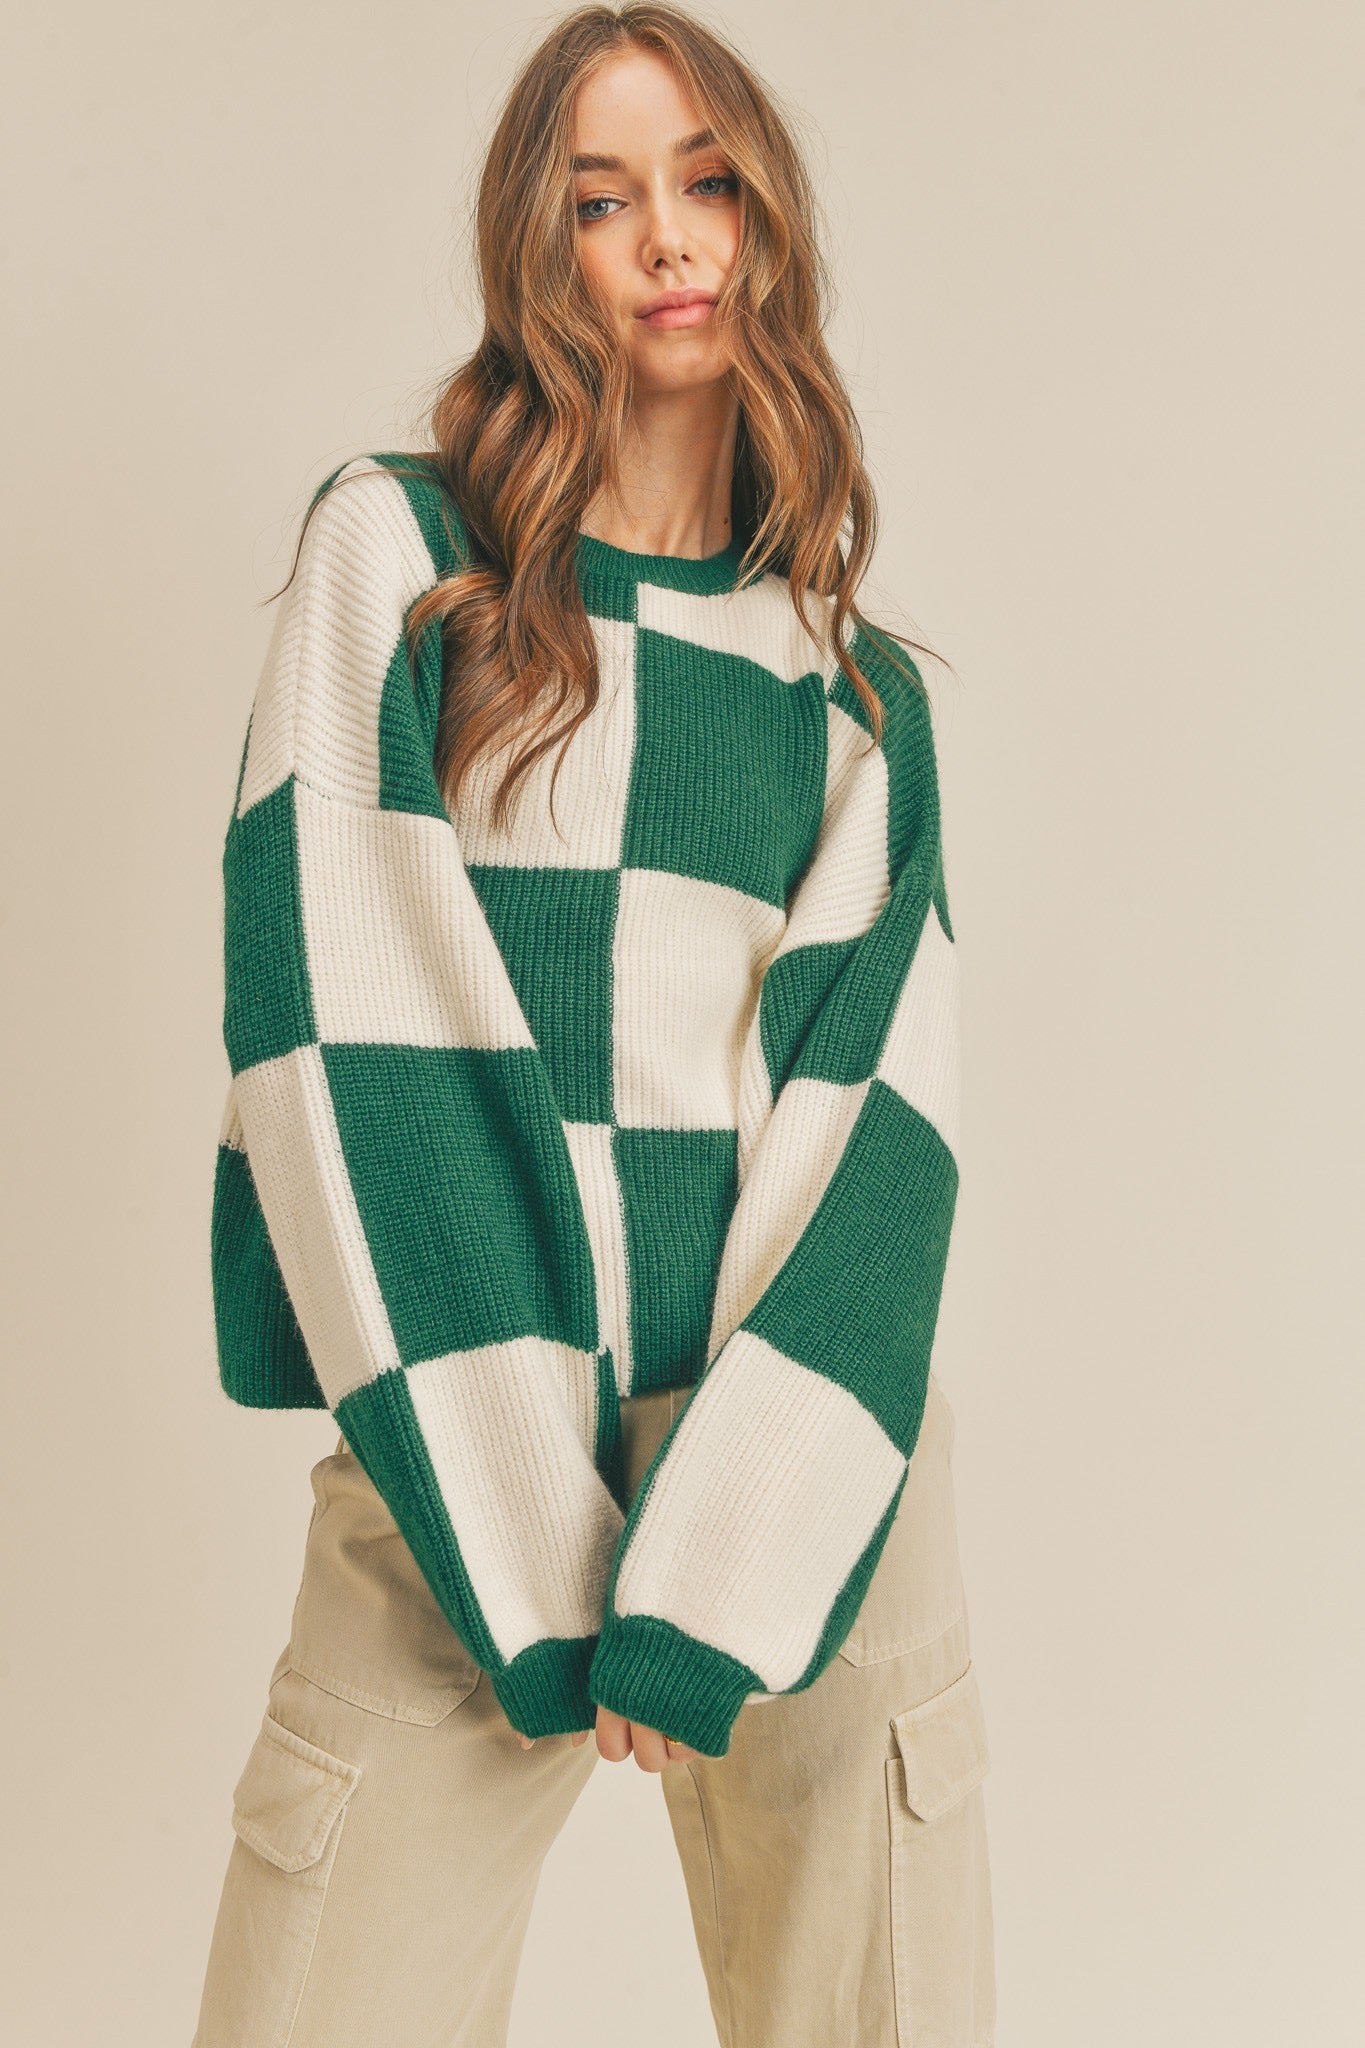 “Forest” checkered sweater